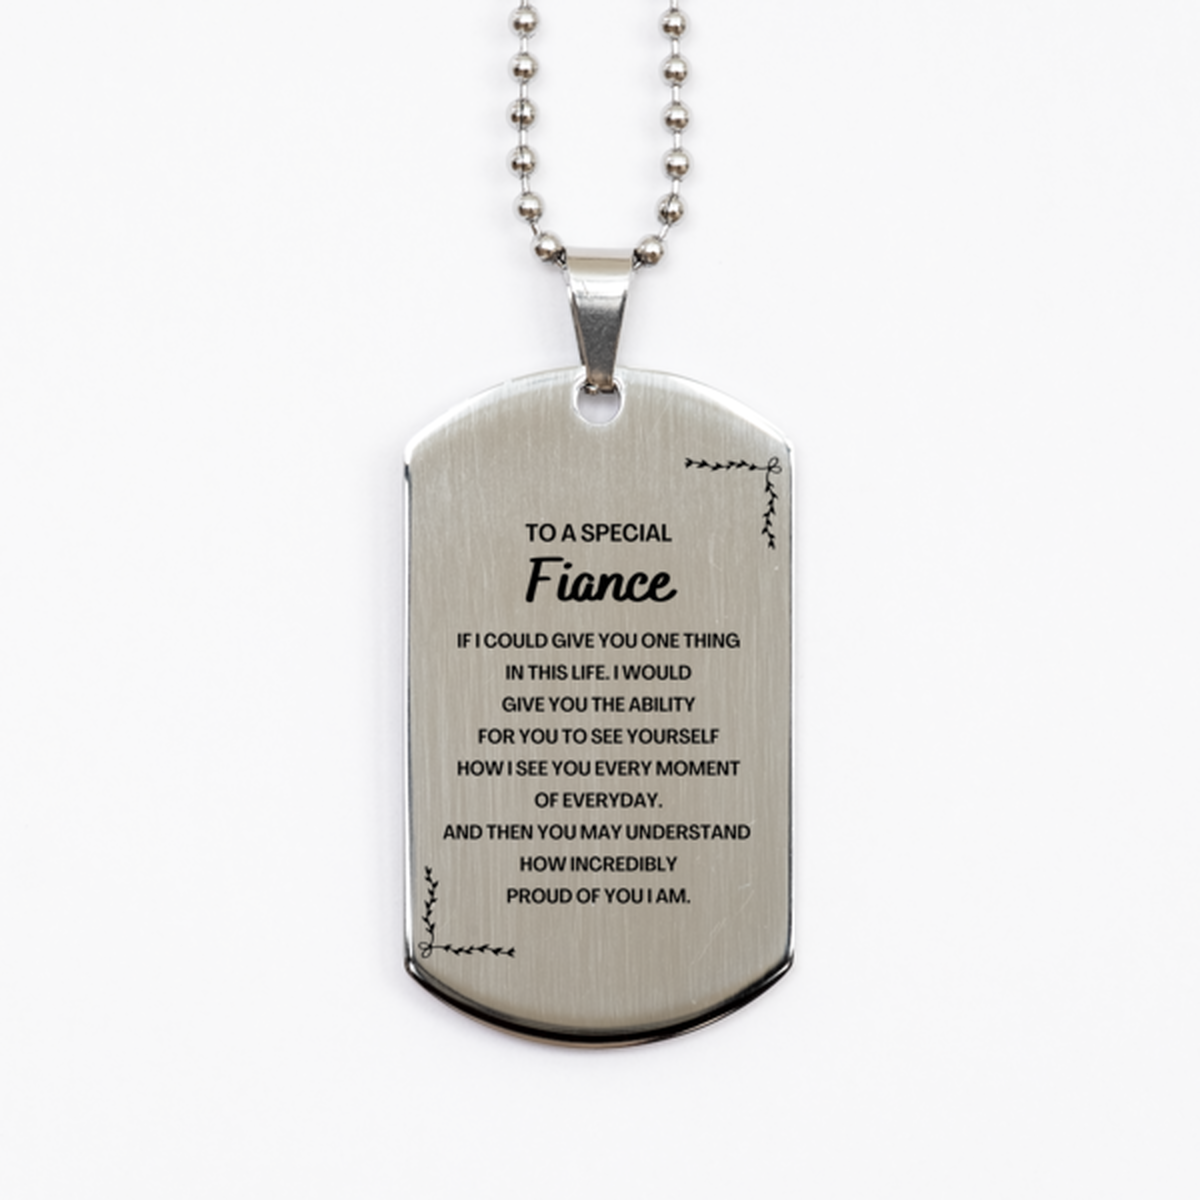 To My Fiance Silver Dog Tag, Gifts For Fiance Engraved, Inspirational Gifts for Christmas Birthday, Epic Gifts for Fiance To A Special Fiance how incredibly proud of you I am